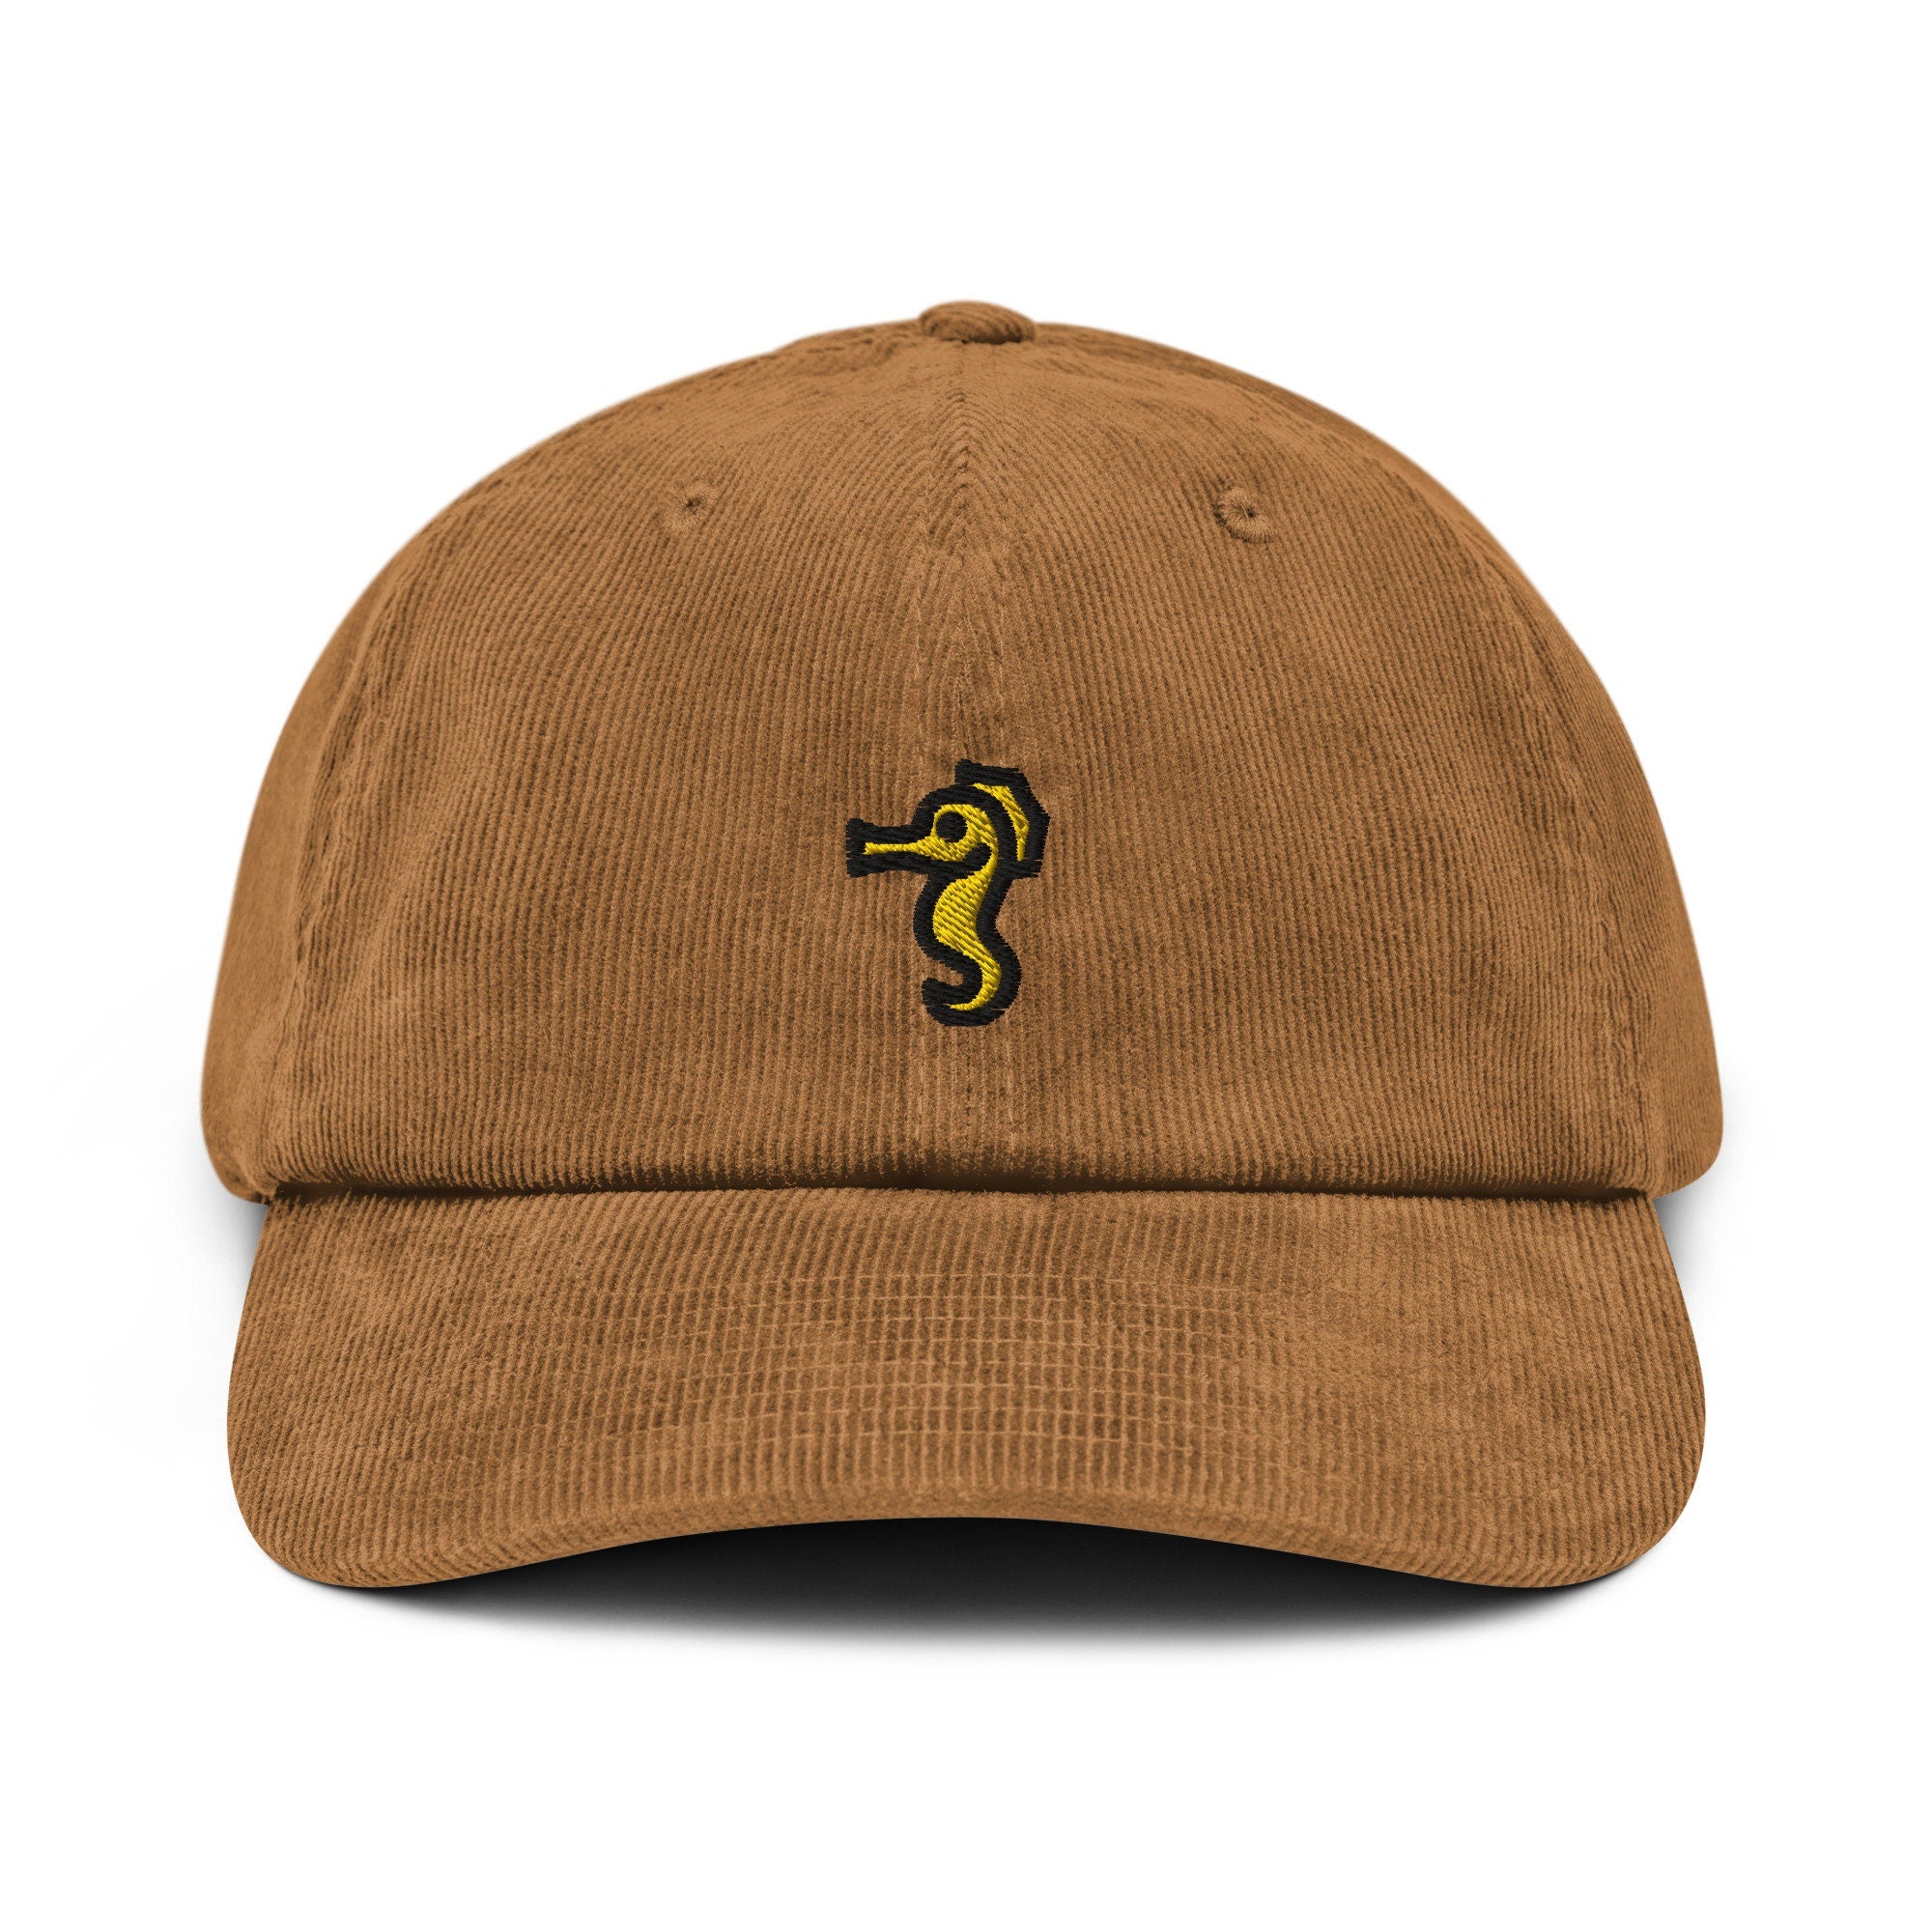 Seahorse Corduroy Hat, Handmade Embroidered Corduroy Dad Cap - Multiple Colors